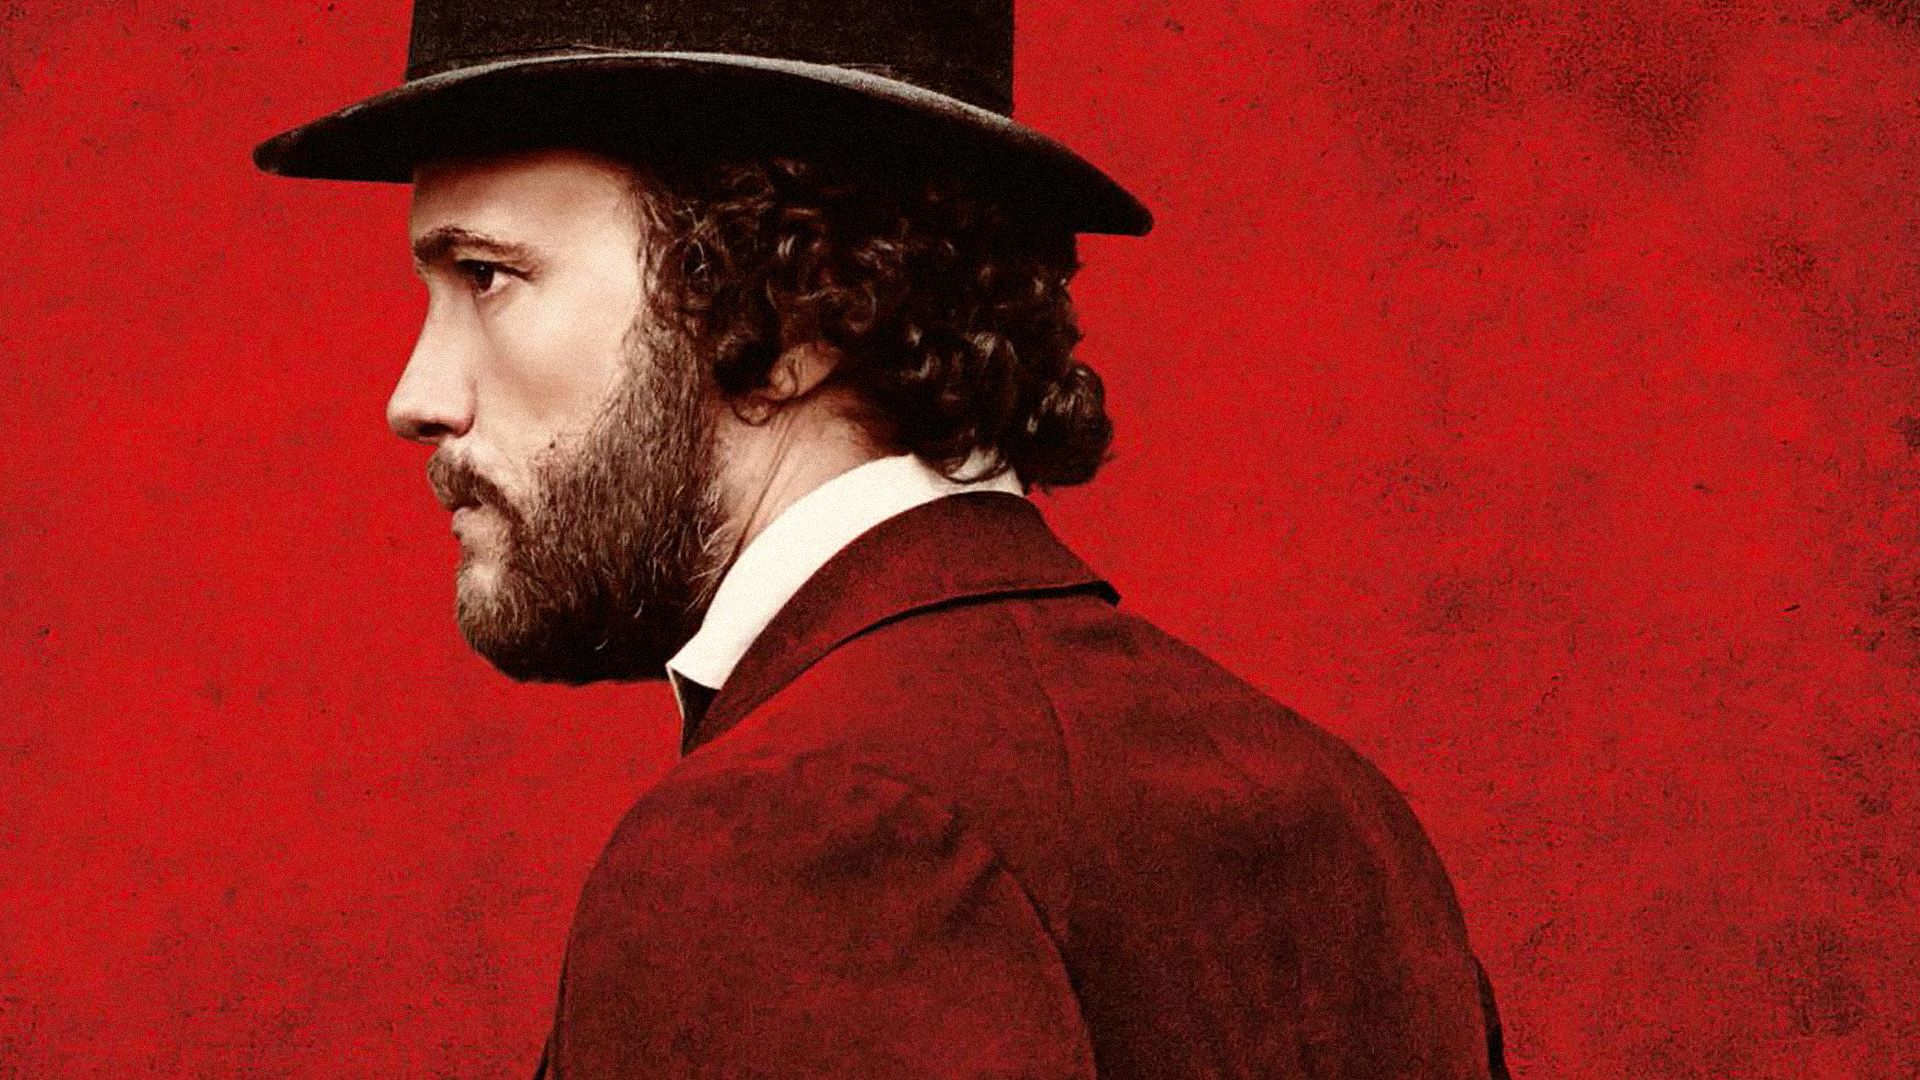 The Young Karl Marx background